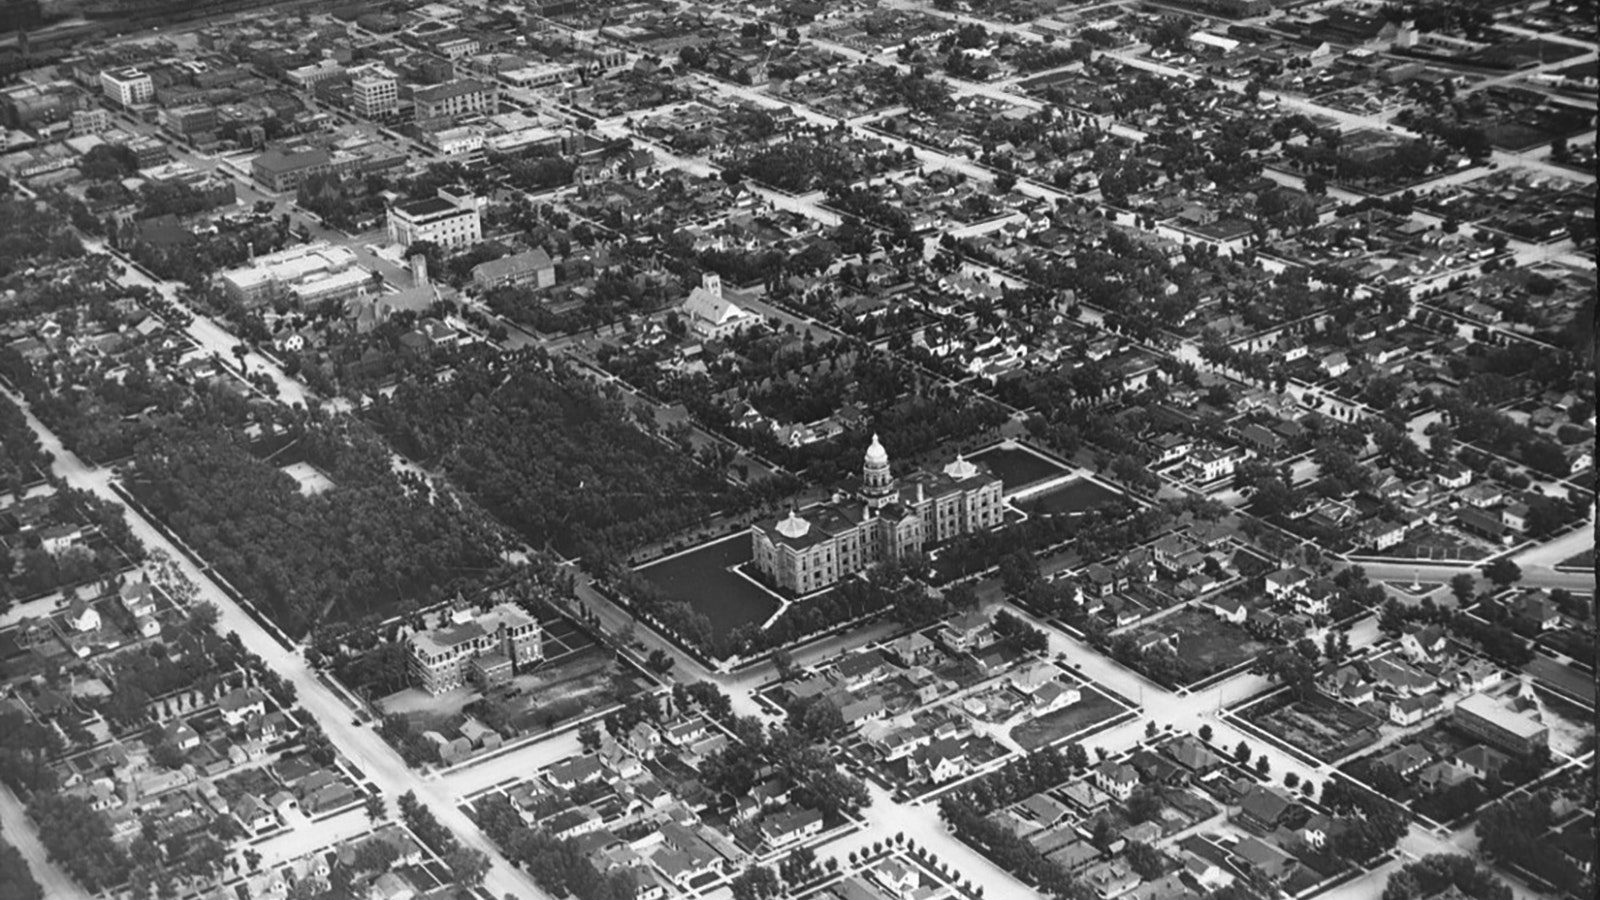 By 1930, Cheyenne had filled its neighborhoods with trees, as seen in this aerial photo looking down on the Wyoming Capitol.